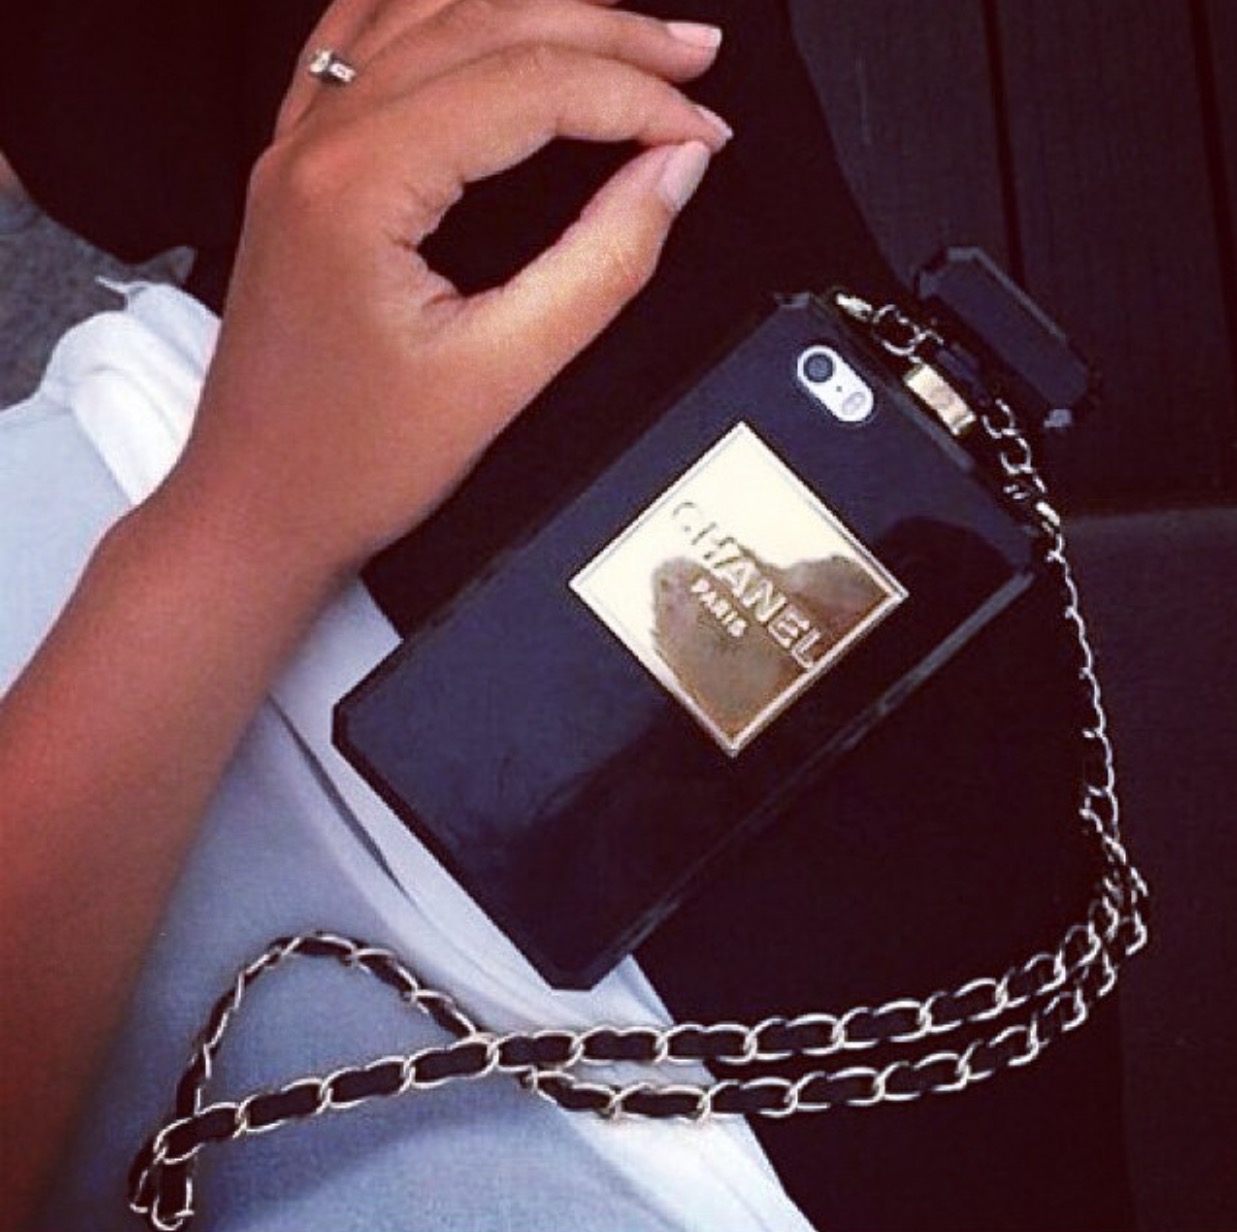 Chanel Iphone Iphonecase Iphone6scase Chaneliphonecase Chanelperfume Chanelperfumecase